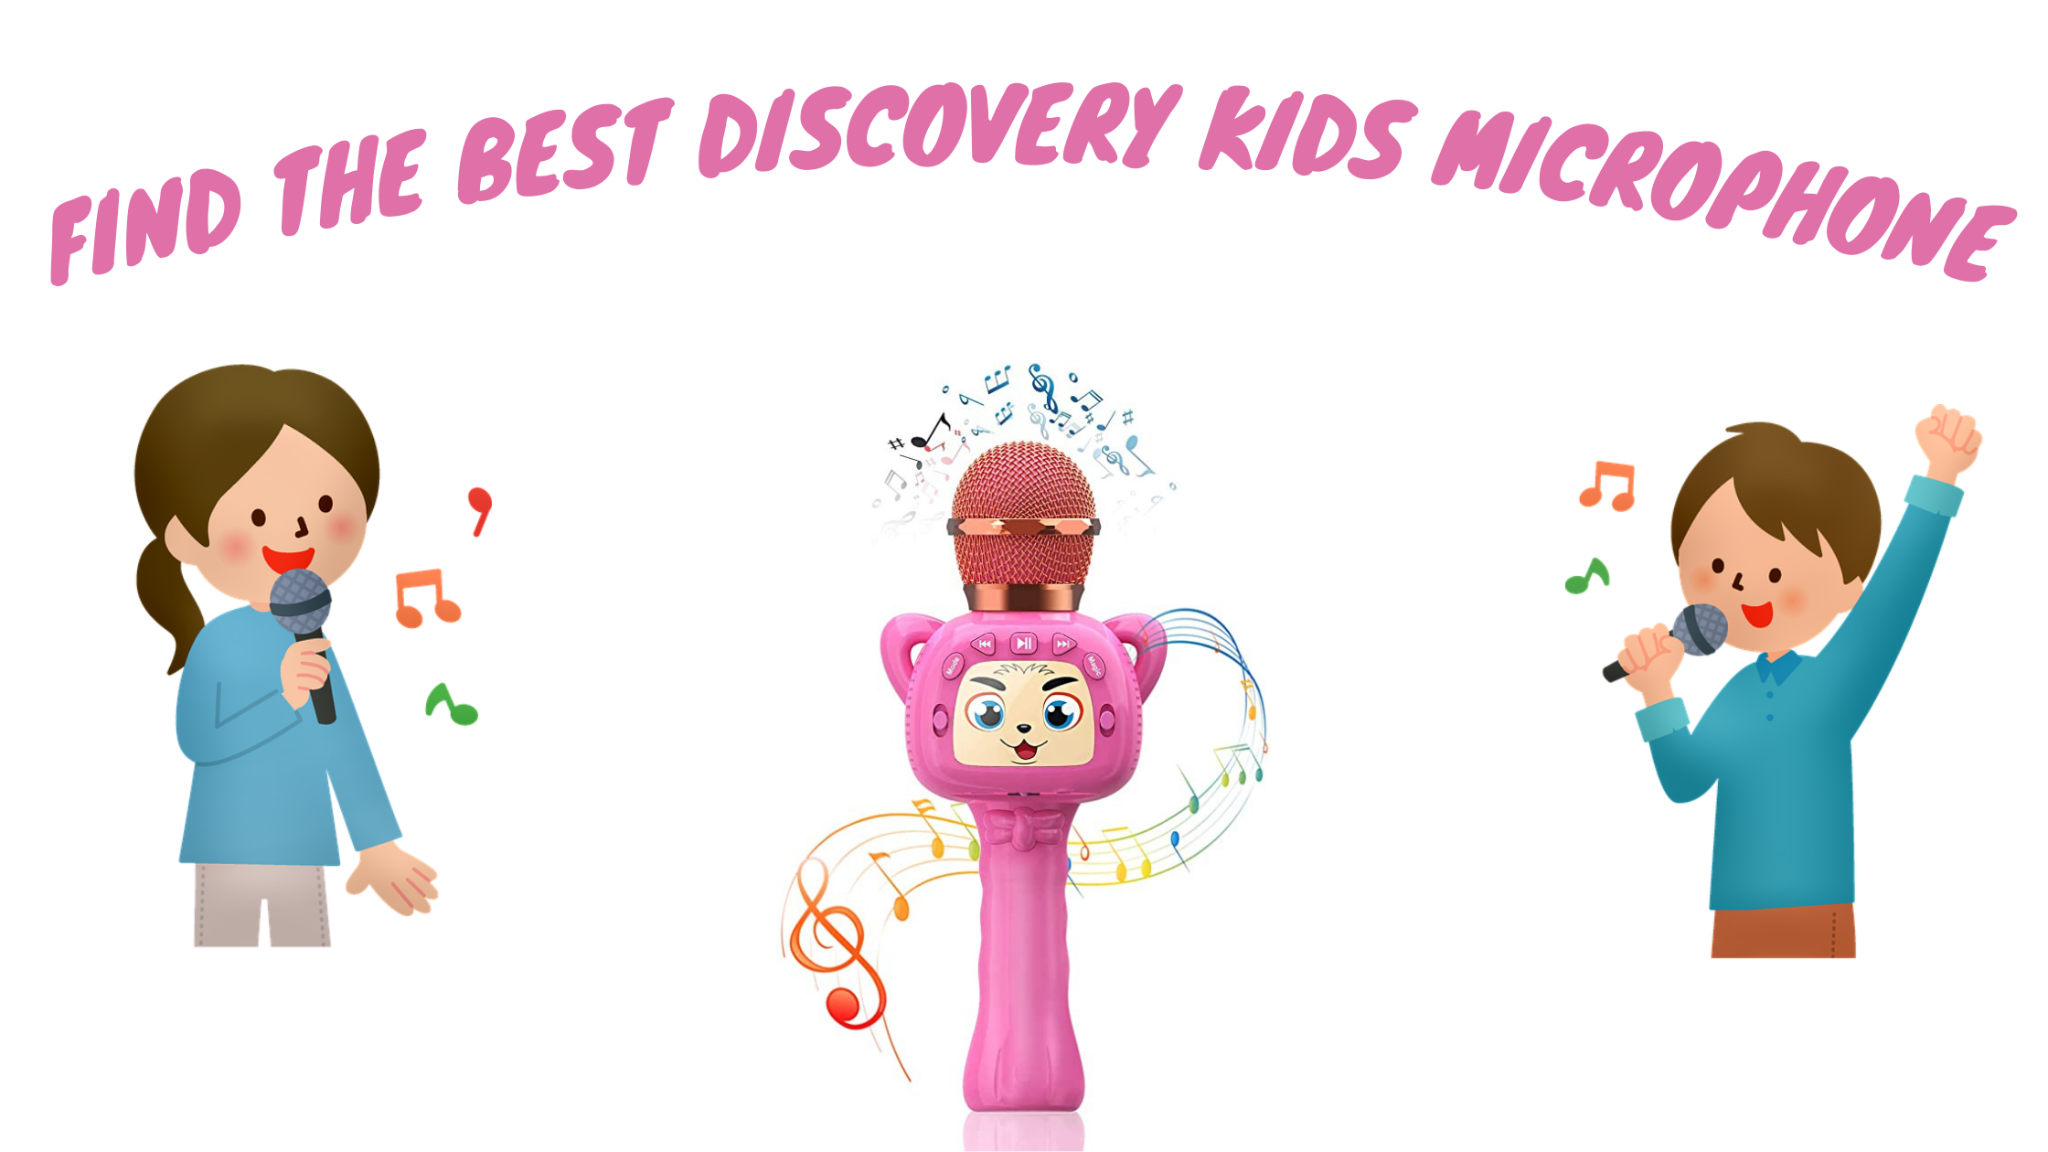 Discovery Kids Microphone